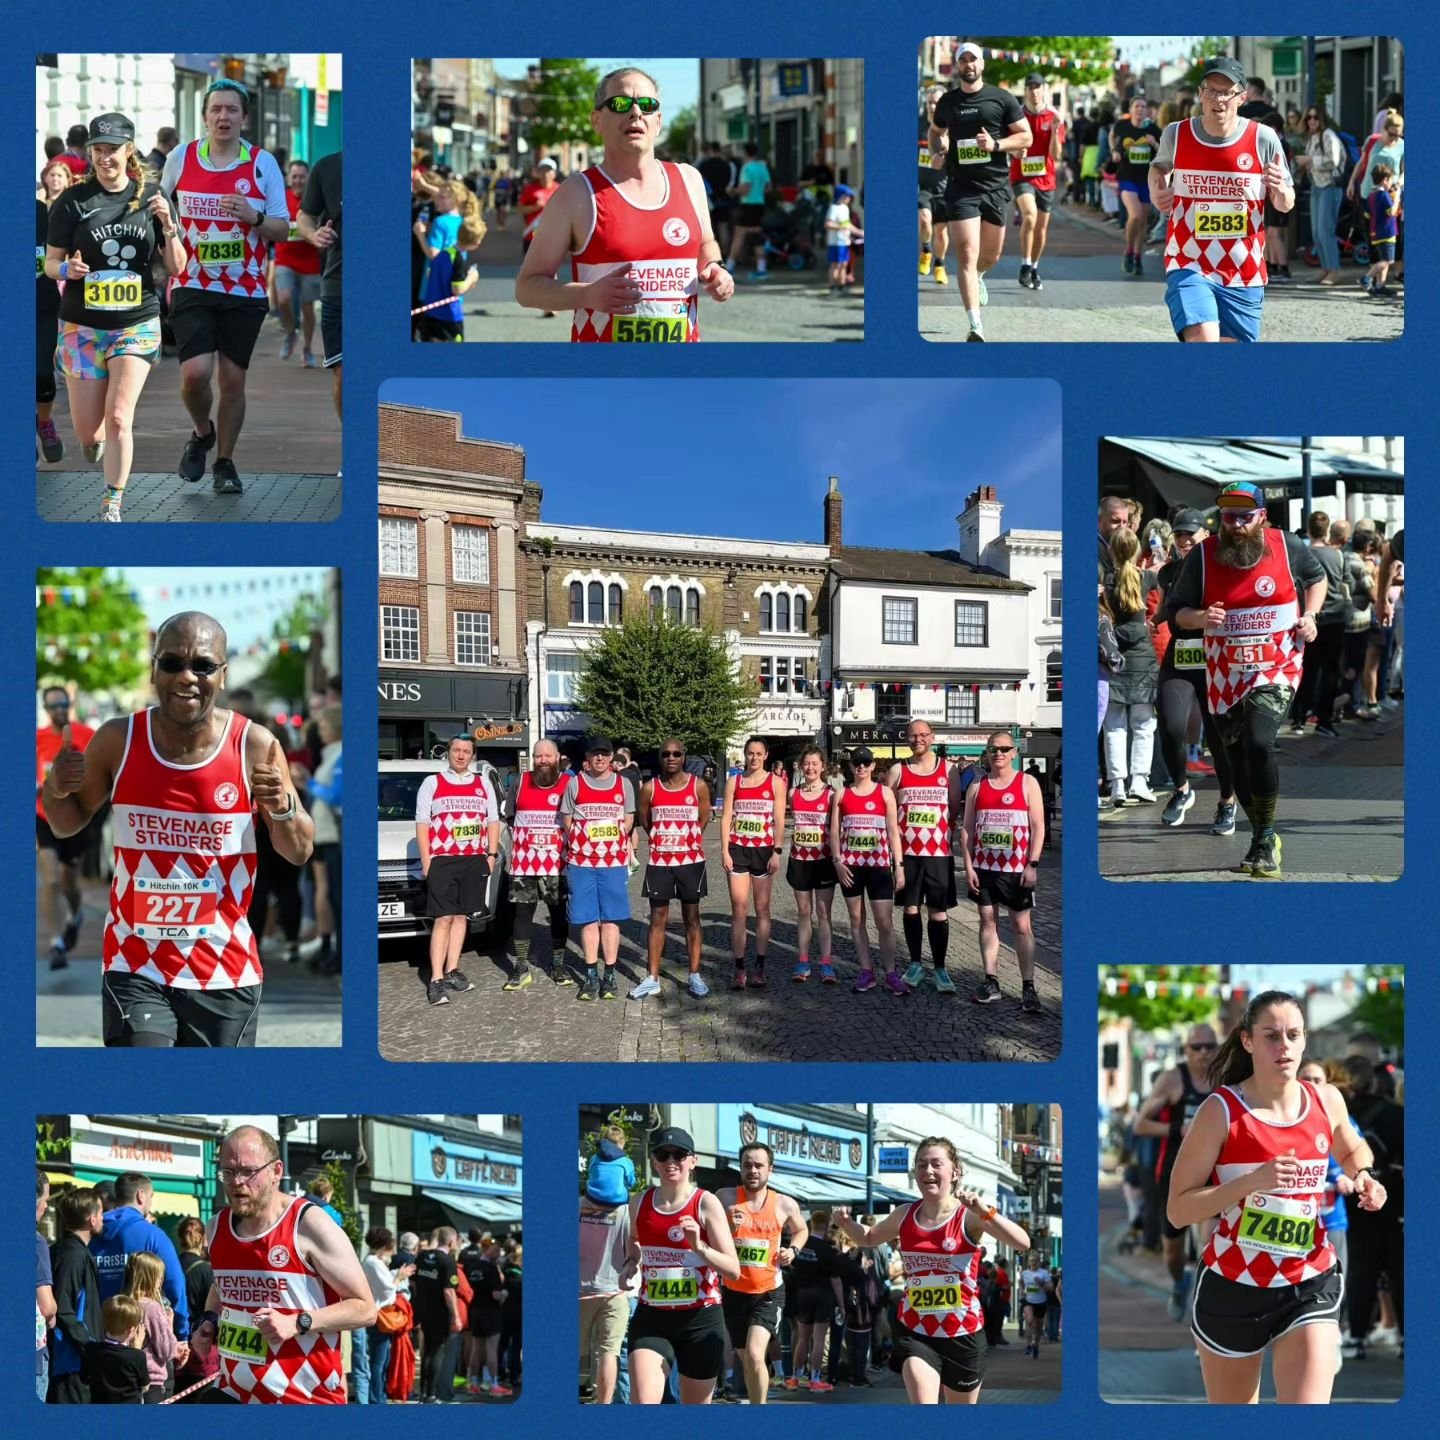 The Hitchin 10k took place in the heart of Hitchin Town Centre with 795 runners taking part.

9 Striders took on the cobbled streets and finished as follows:
Steve Dennis 45:06 (PB)
Lucy Crocker 46:20
Neil Wash 47:08 (PB)
Karl Hudson 50:18
Kate Towse